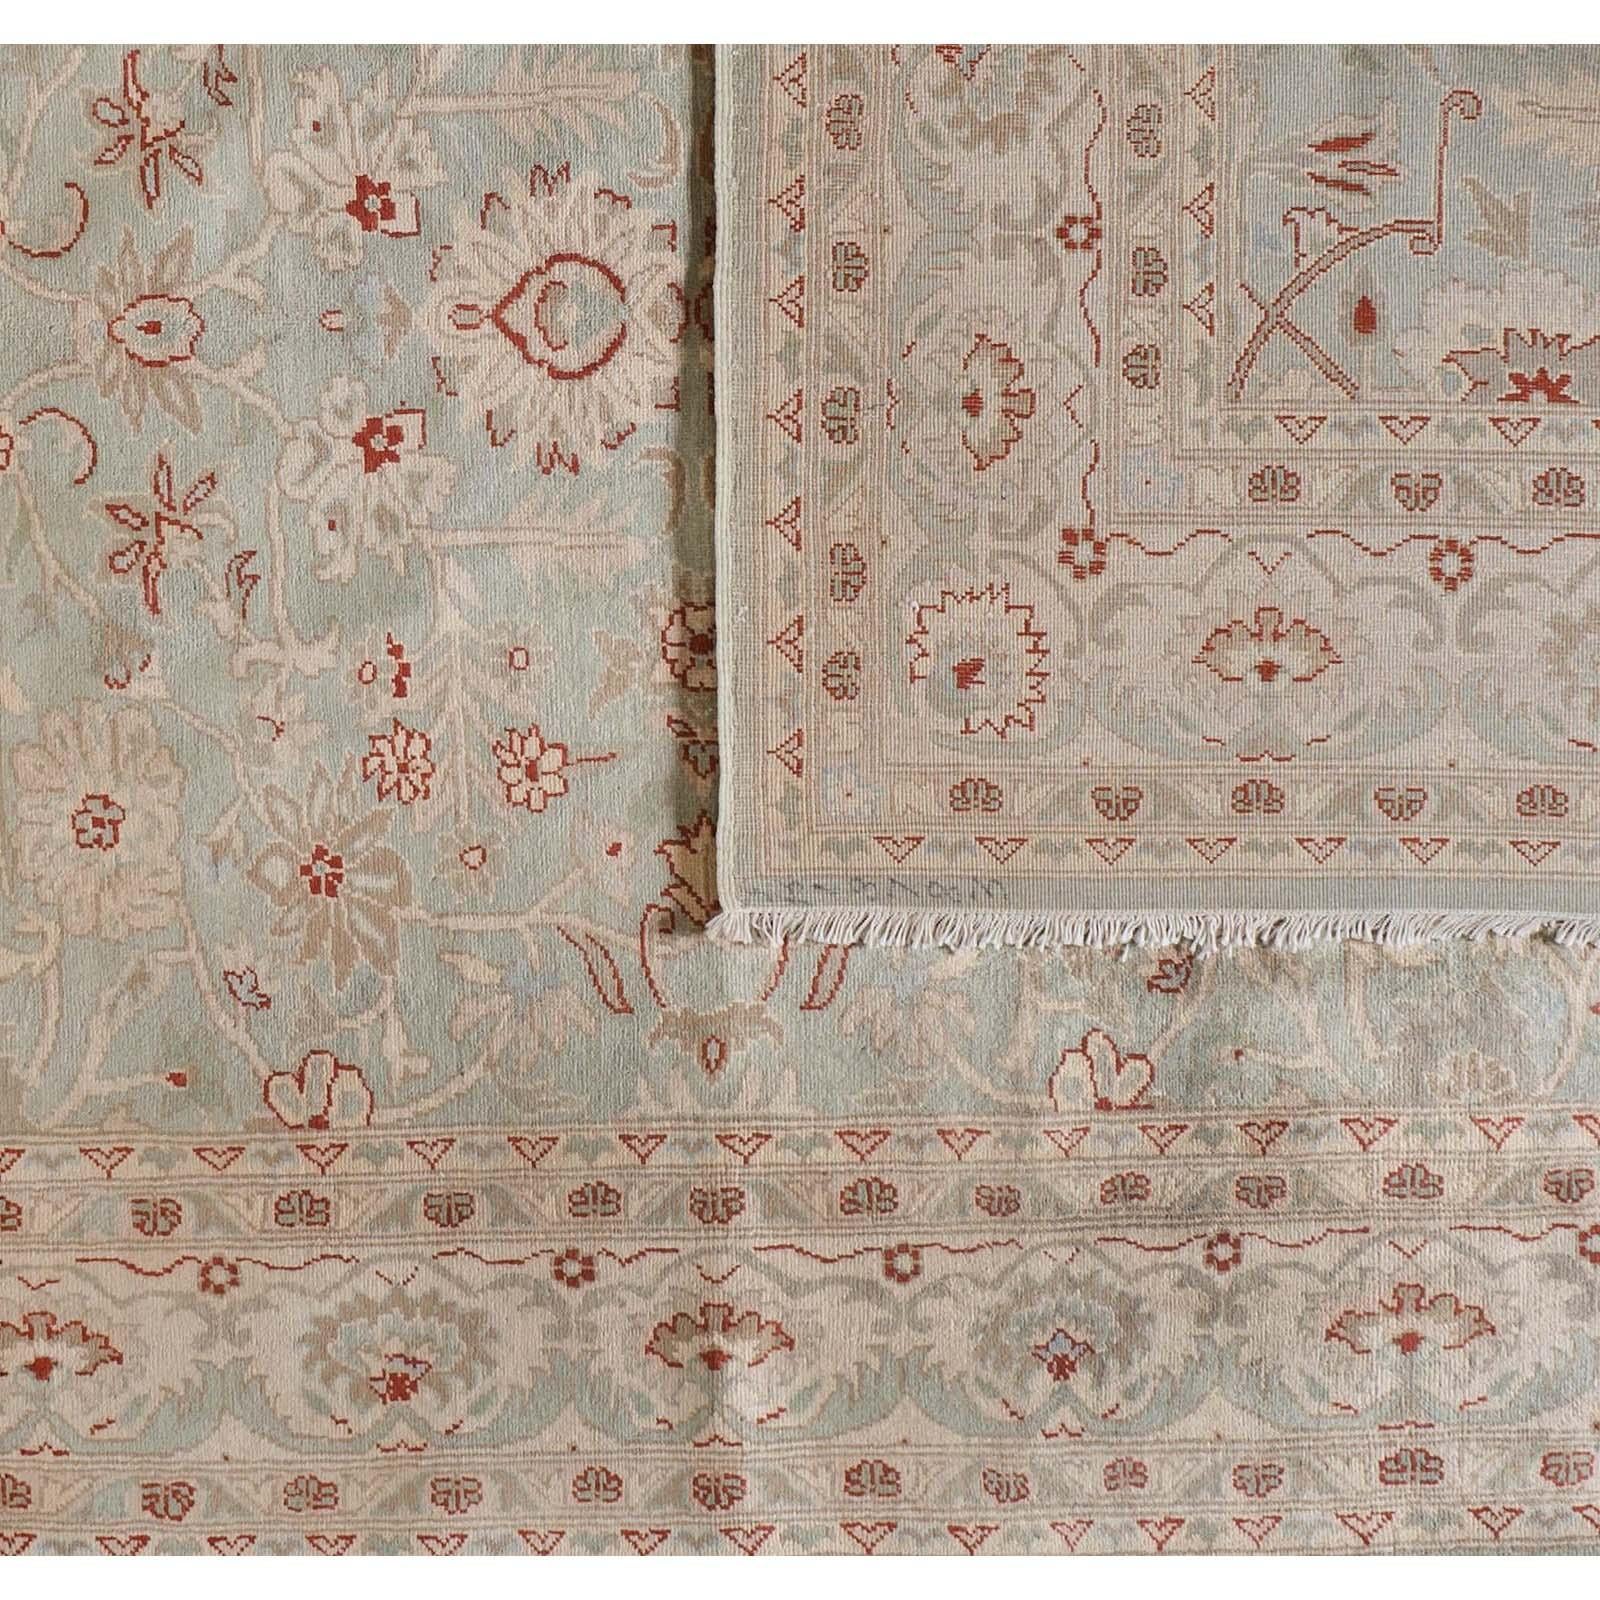 Light sage green provides the backdrop for a floral pattern blending cream, taupe and red in this traditional Pakistani rug with a contemporary feel. Wool. Hand knotted in Pakistan using vegetal dyes.